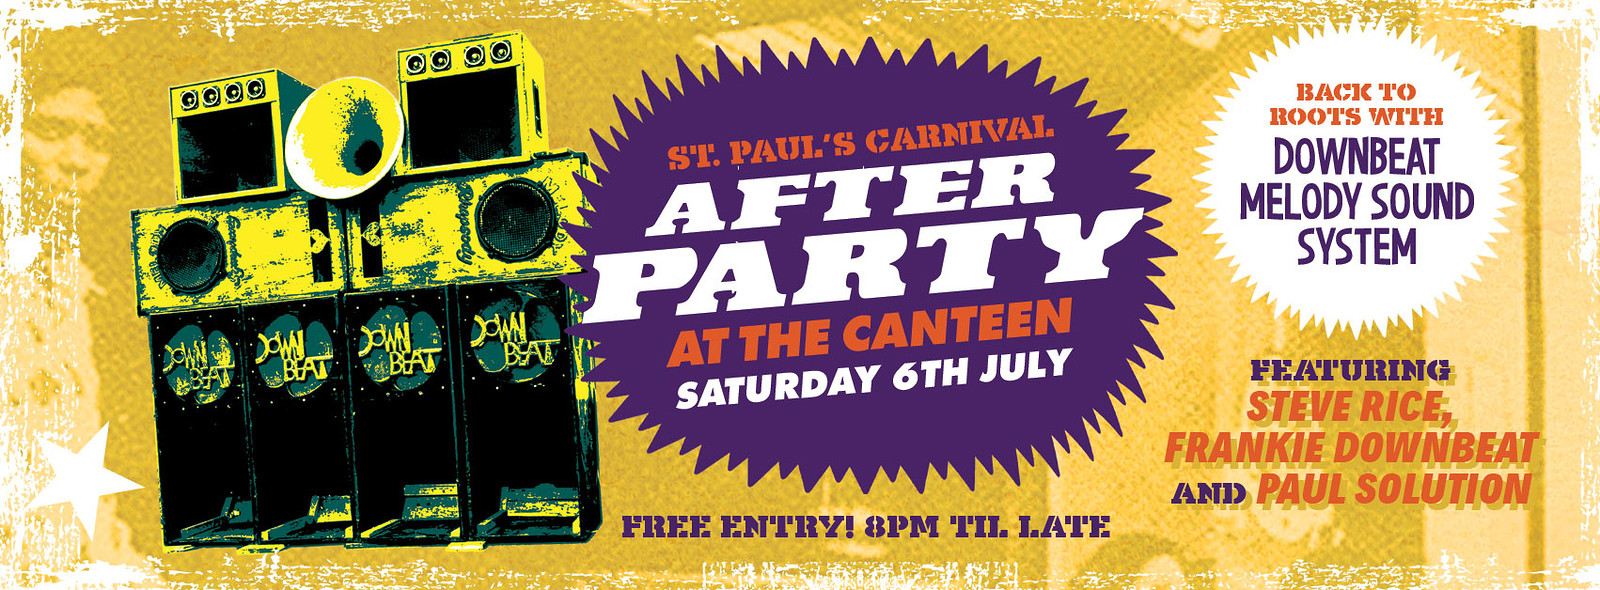 St Paul's Carnival After Party at The Canteen